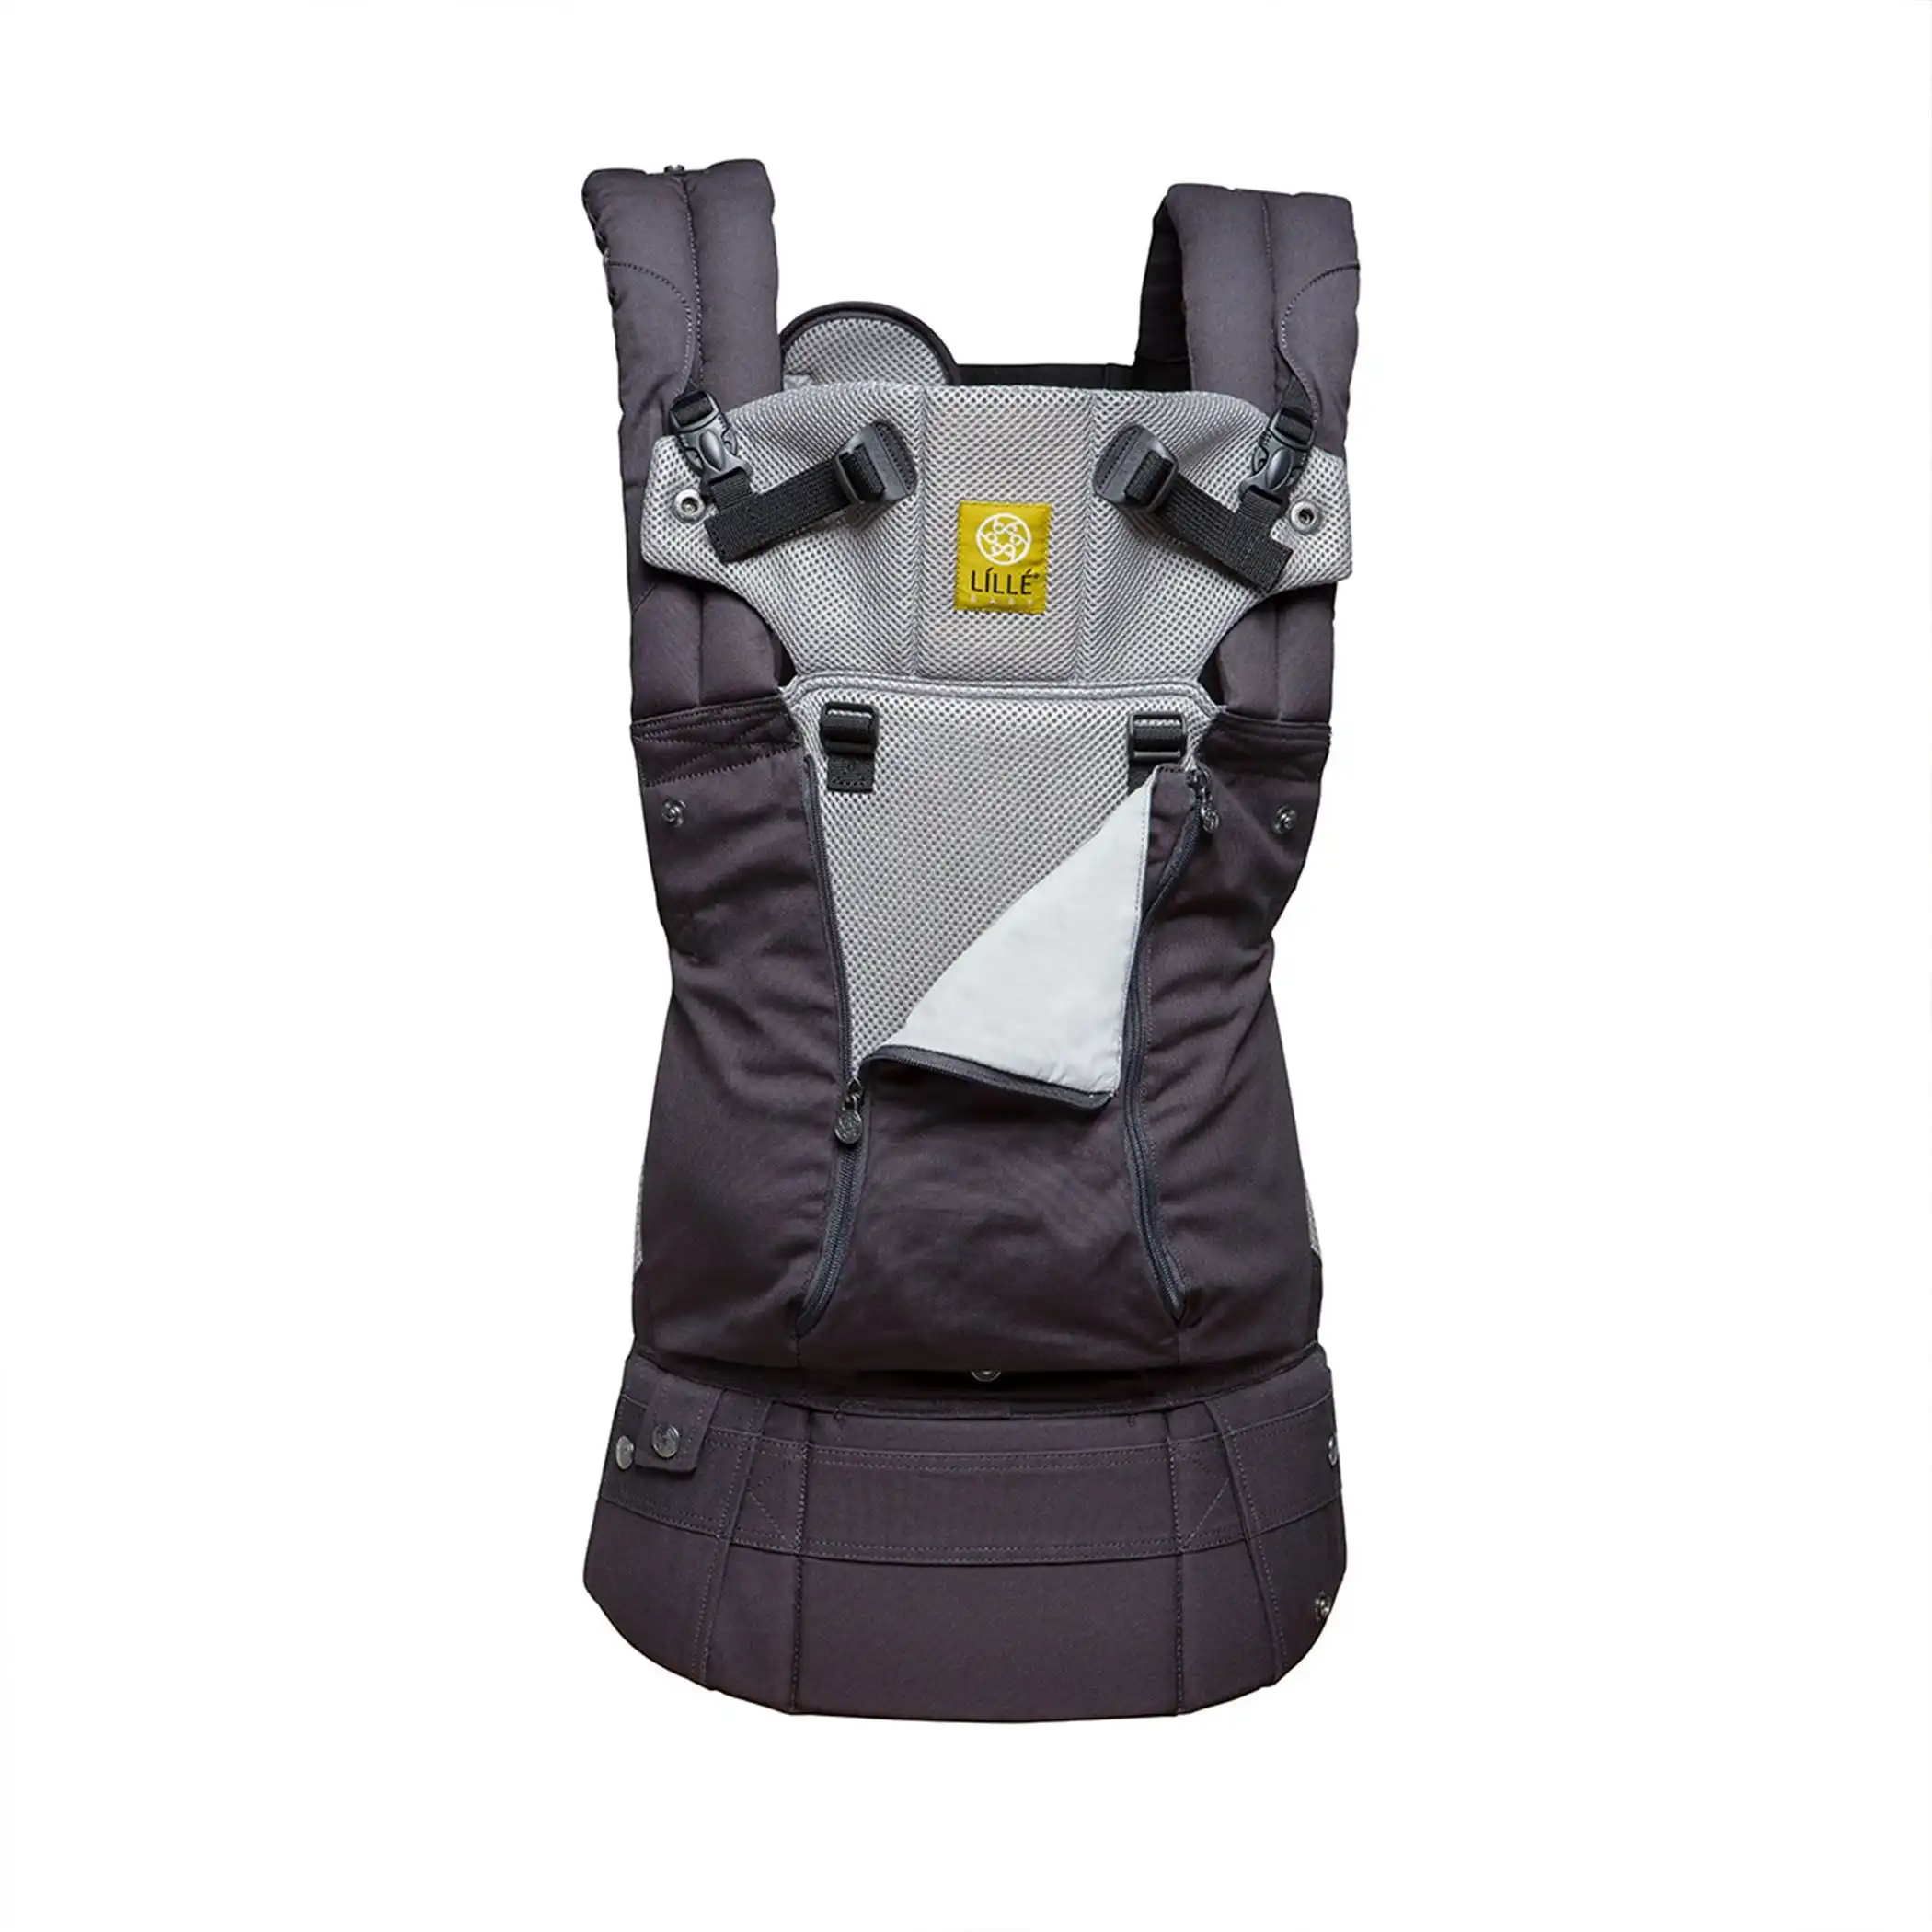 Lillebaby All Seasons Baby Carrier Charcoal/Silver